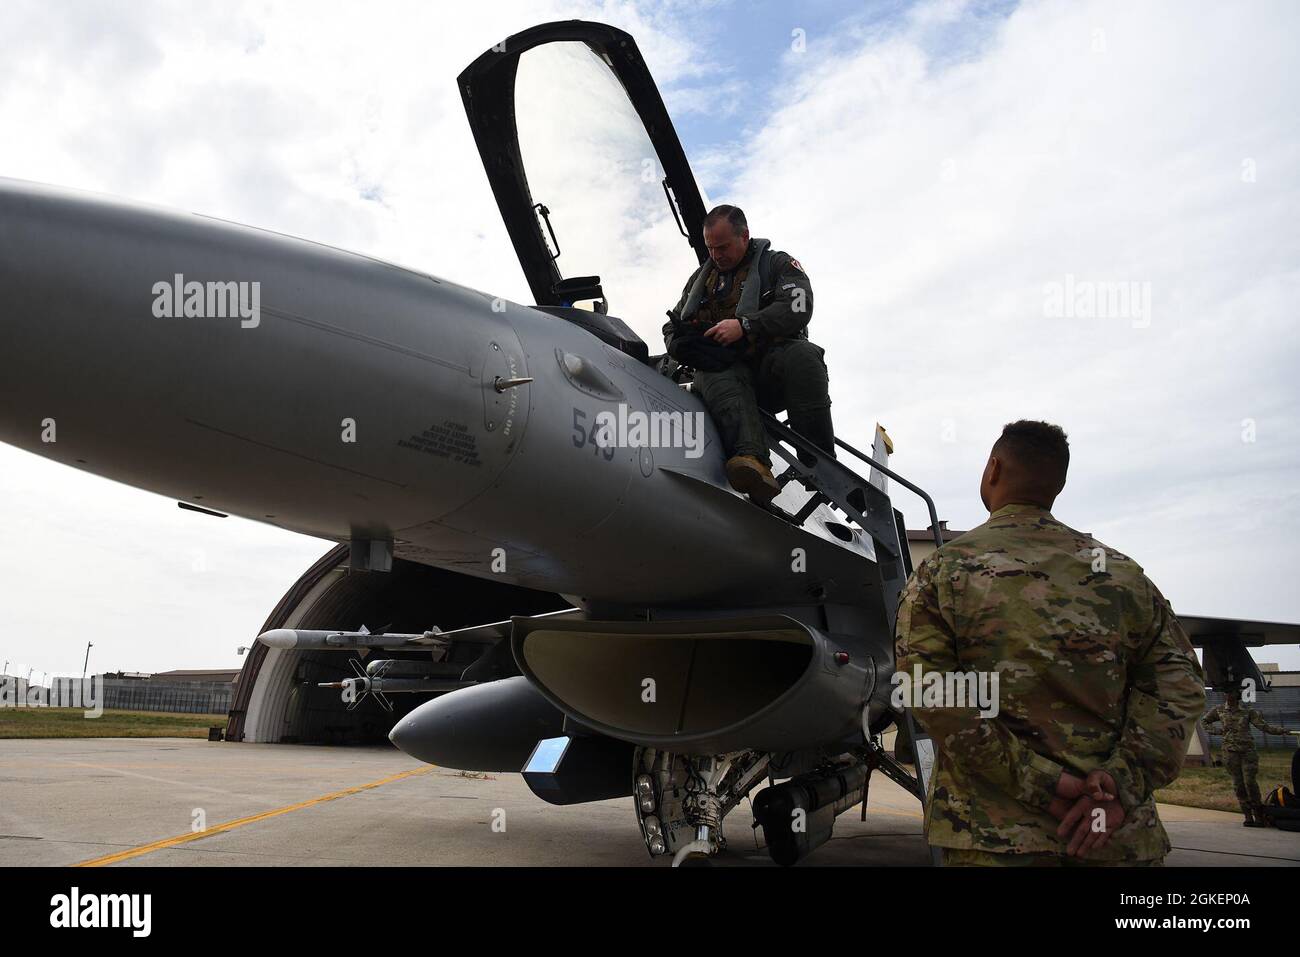 Lt. Gen. Scott Pleus, 7th Air Force commander, performs a preflight inspection on an F-16 Fighting Falcon with Senior Airman Mequail Fridge, 8th Aircraft Maintenance Squadron crew chief, on the flightline at Kunsan Air Base, Republic of Korea, April 1, 2021. During his visit, Pleus held a mentorship session with Kunsan’s company grade officers, toured the O’Malley Dining Facility, visited the fighter squadrons and more. Stock Photo